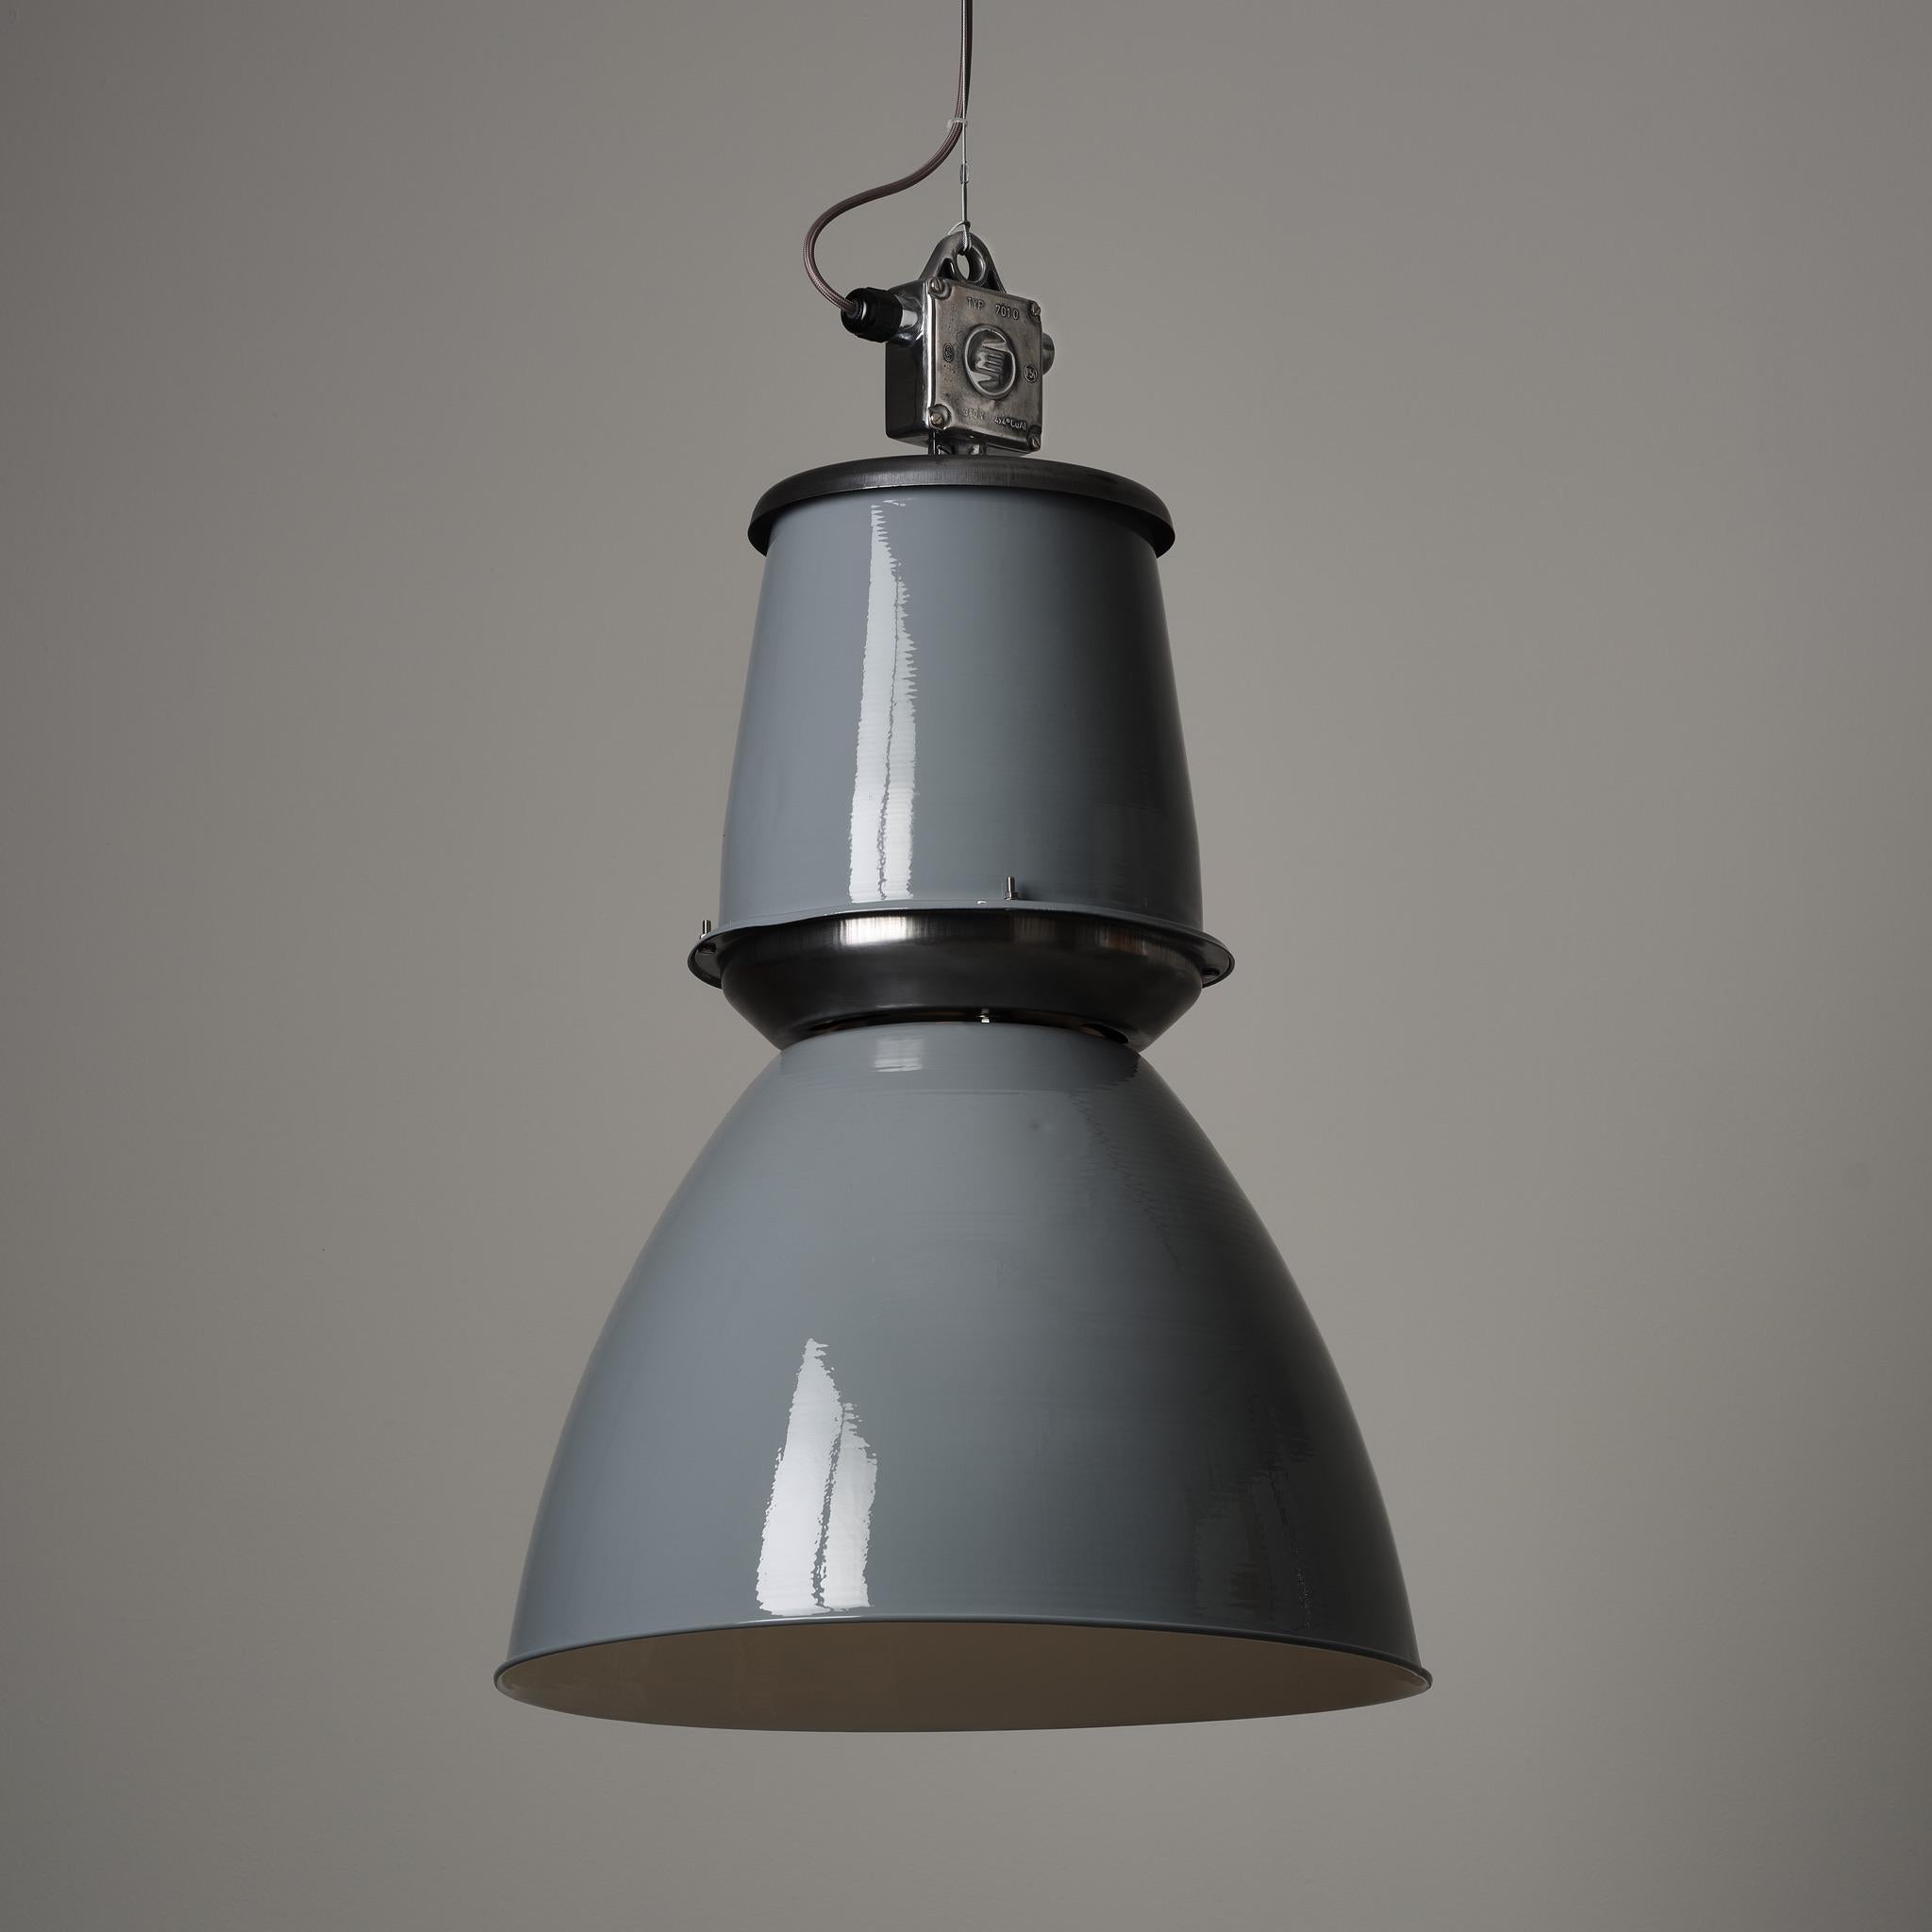 20th Century Vintage Giant Czech Pendant Light - Reconditioned Black/ Grey/ White For Sale